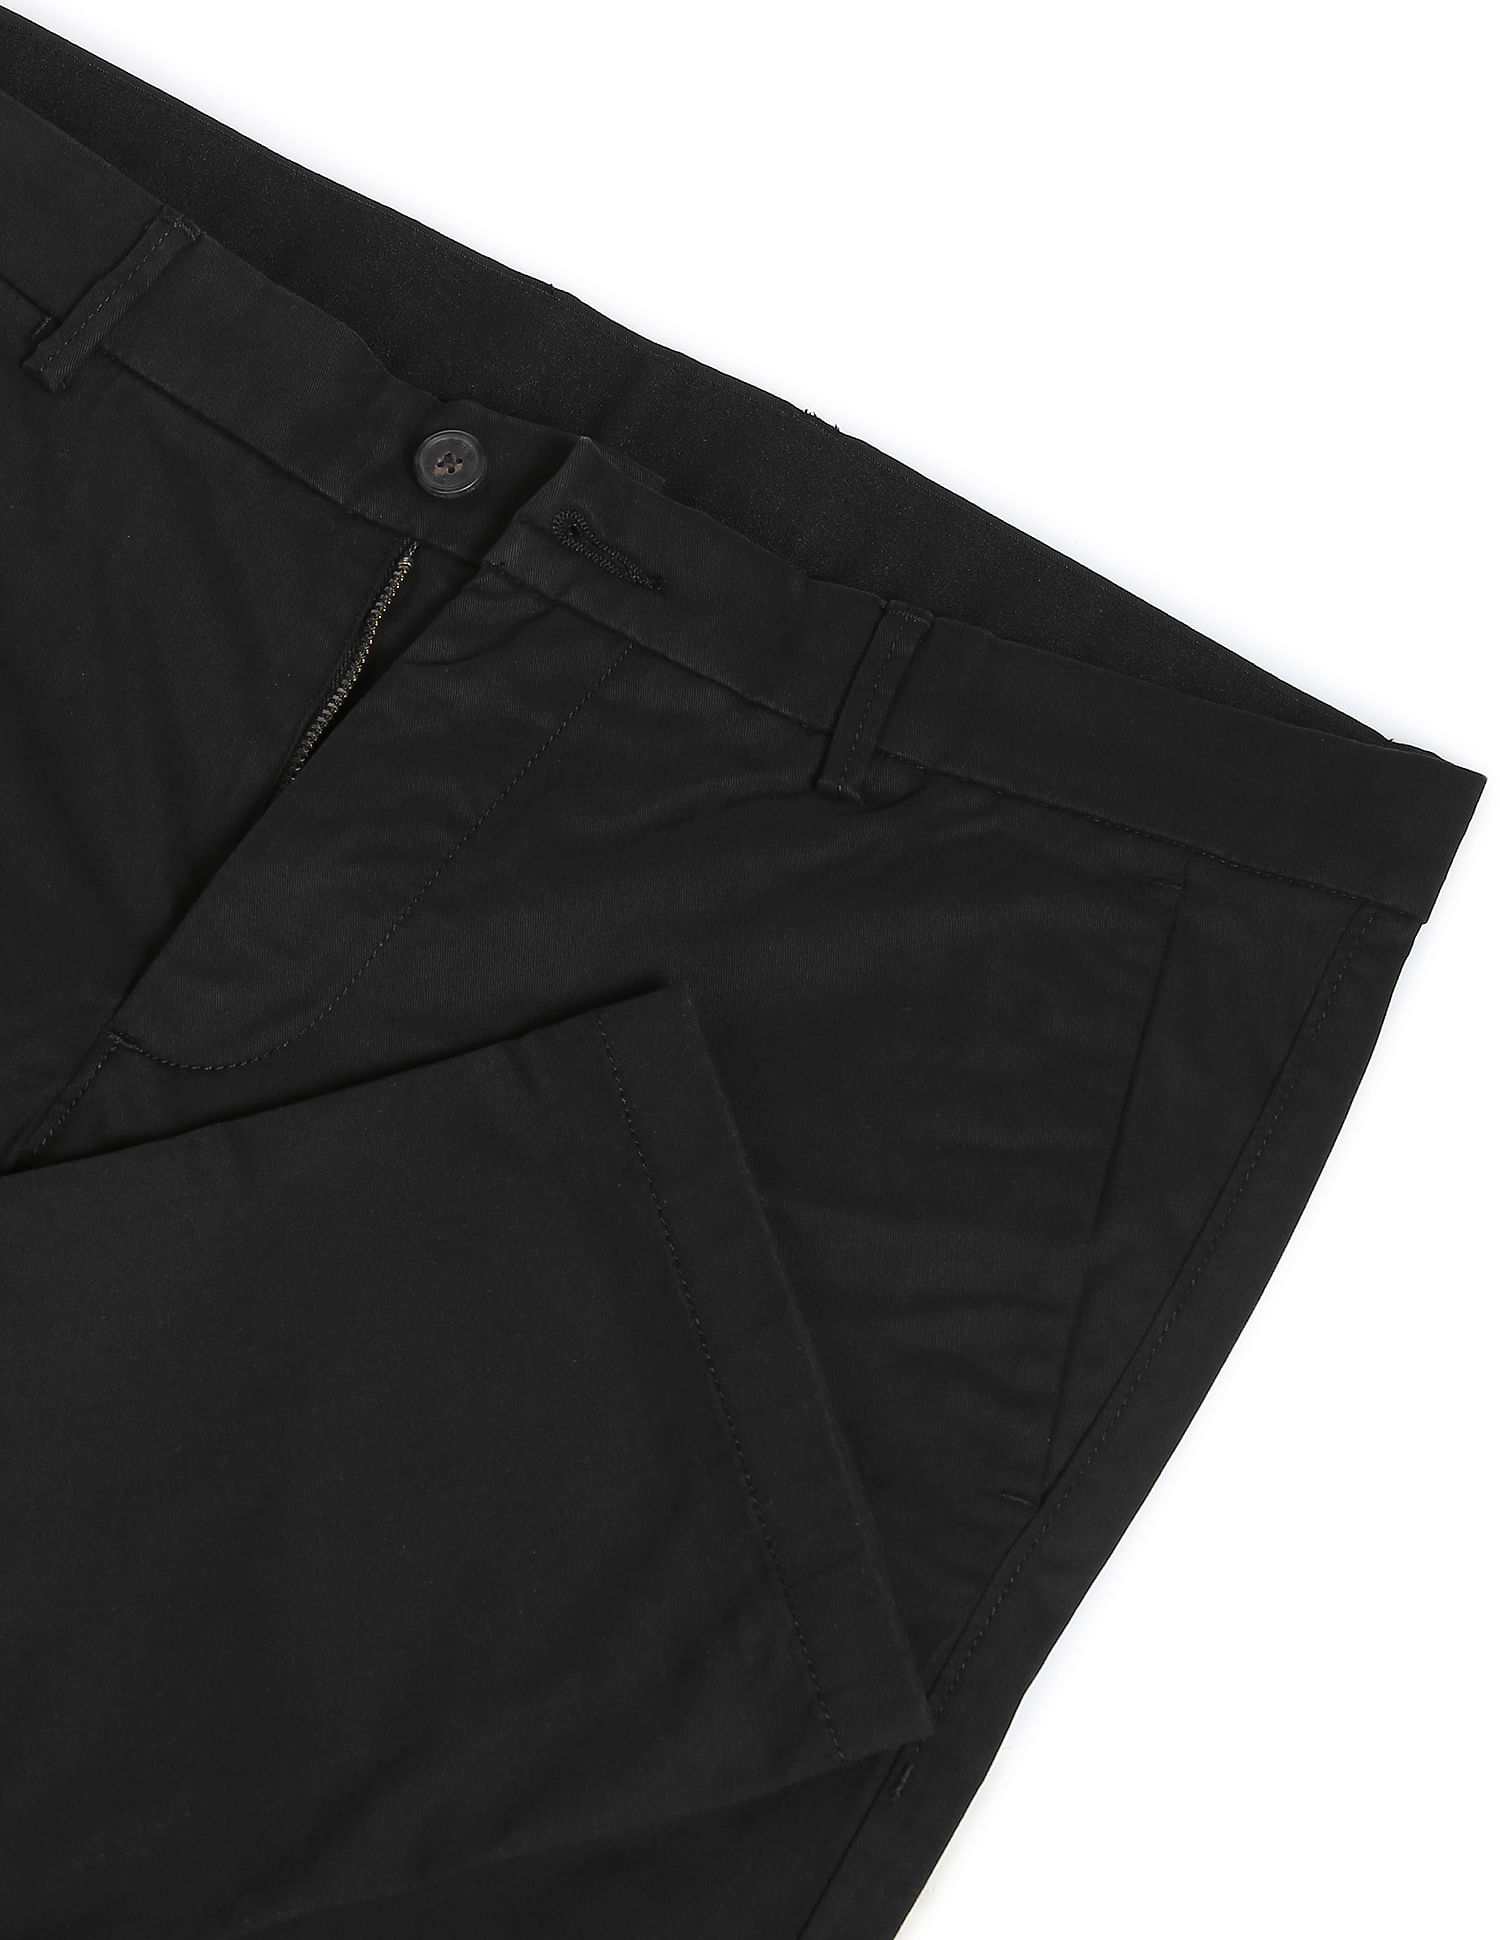 Kit Blake trousers are a smart stridemaking everyday essential